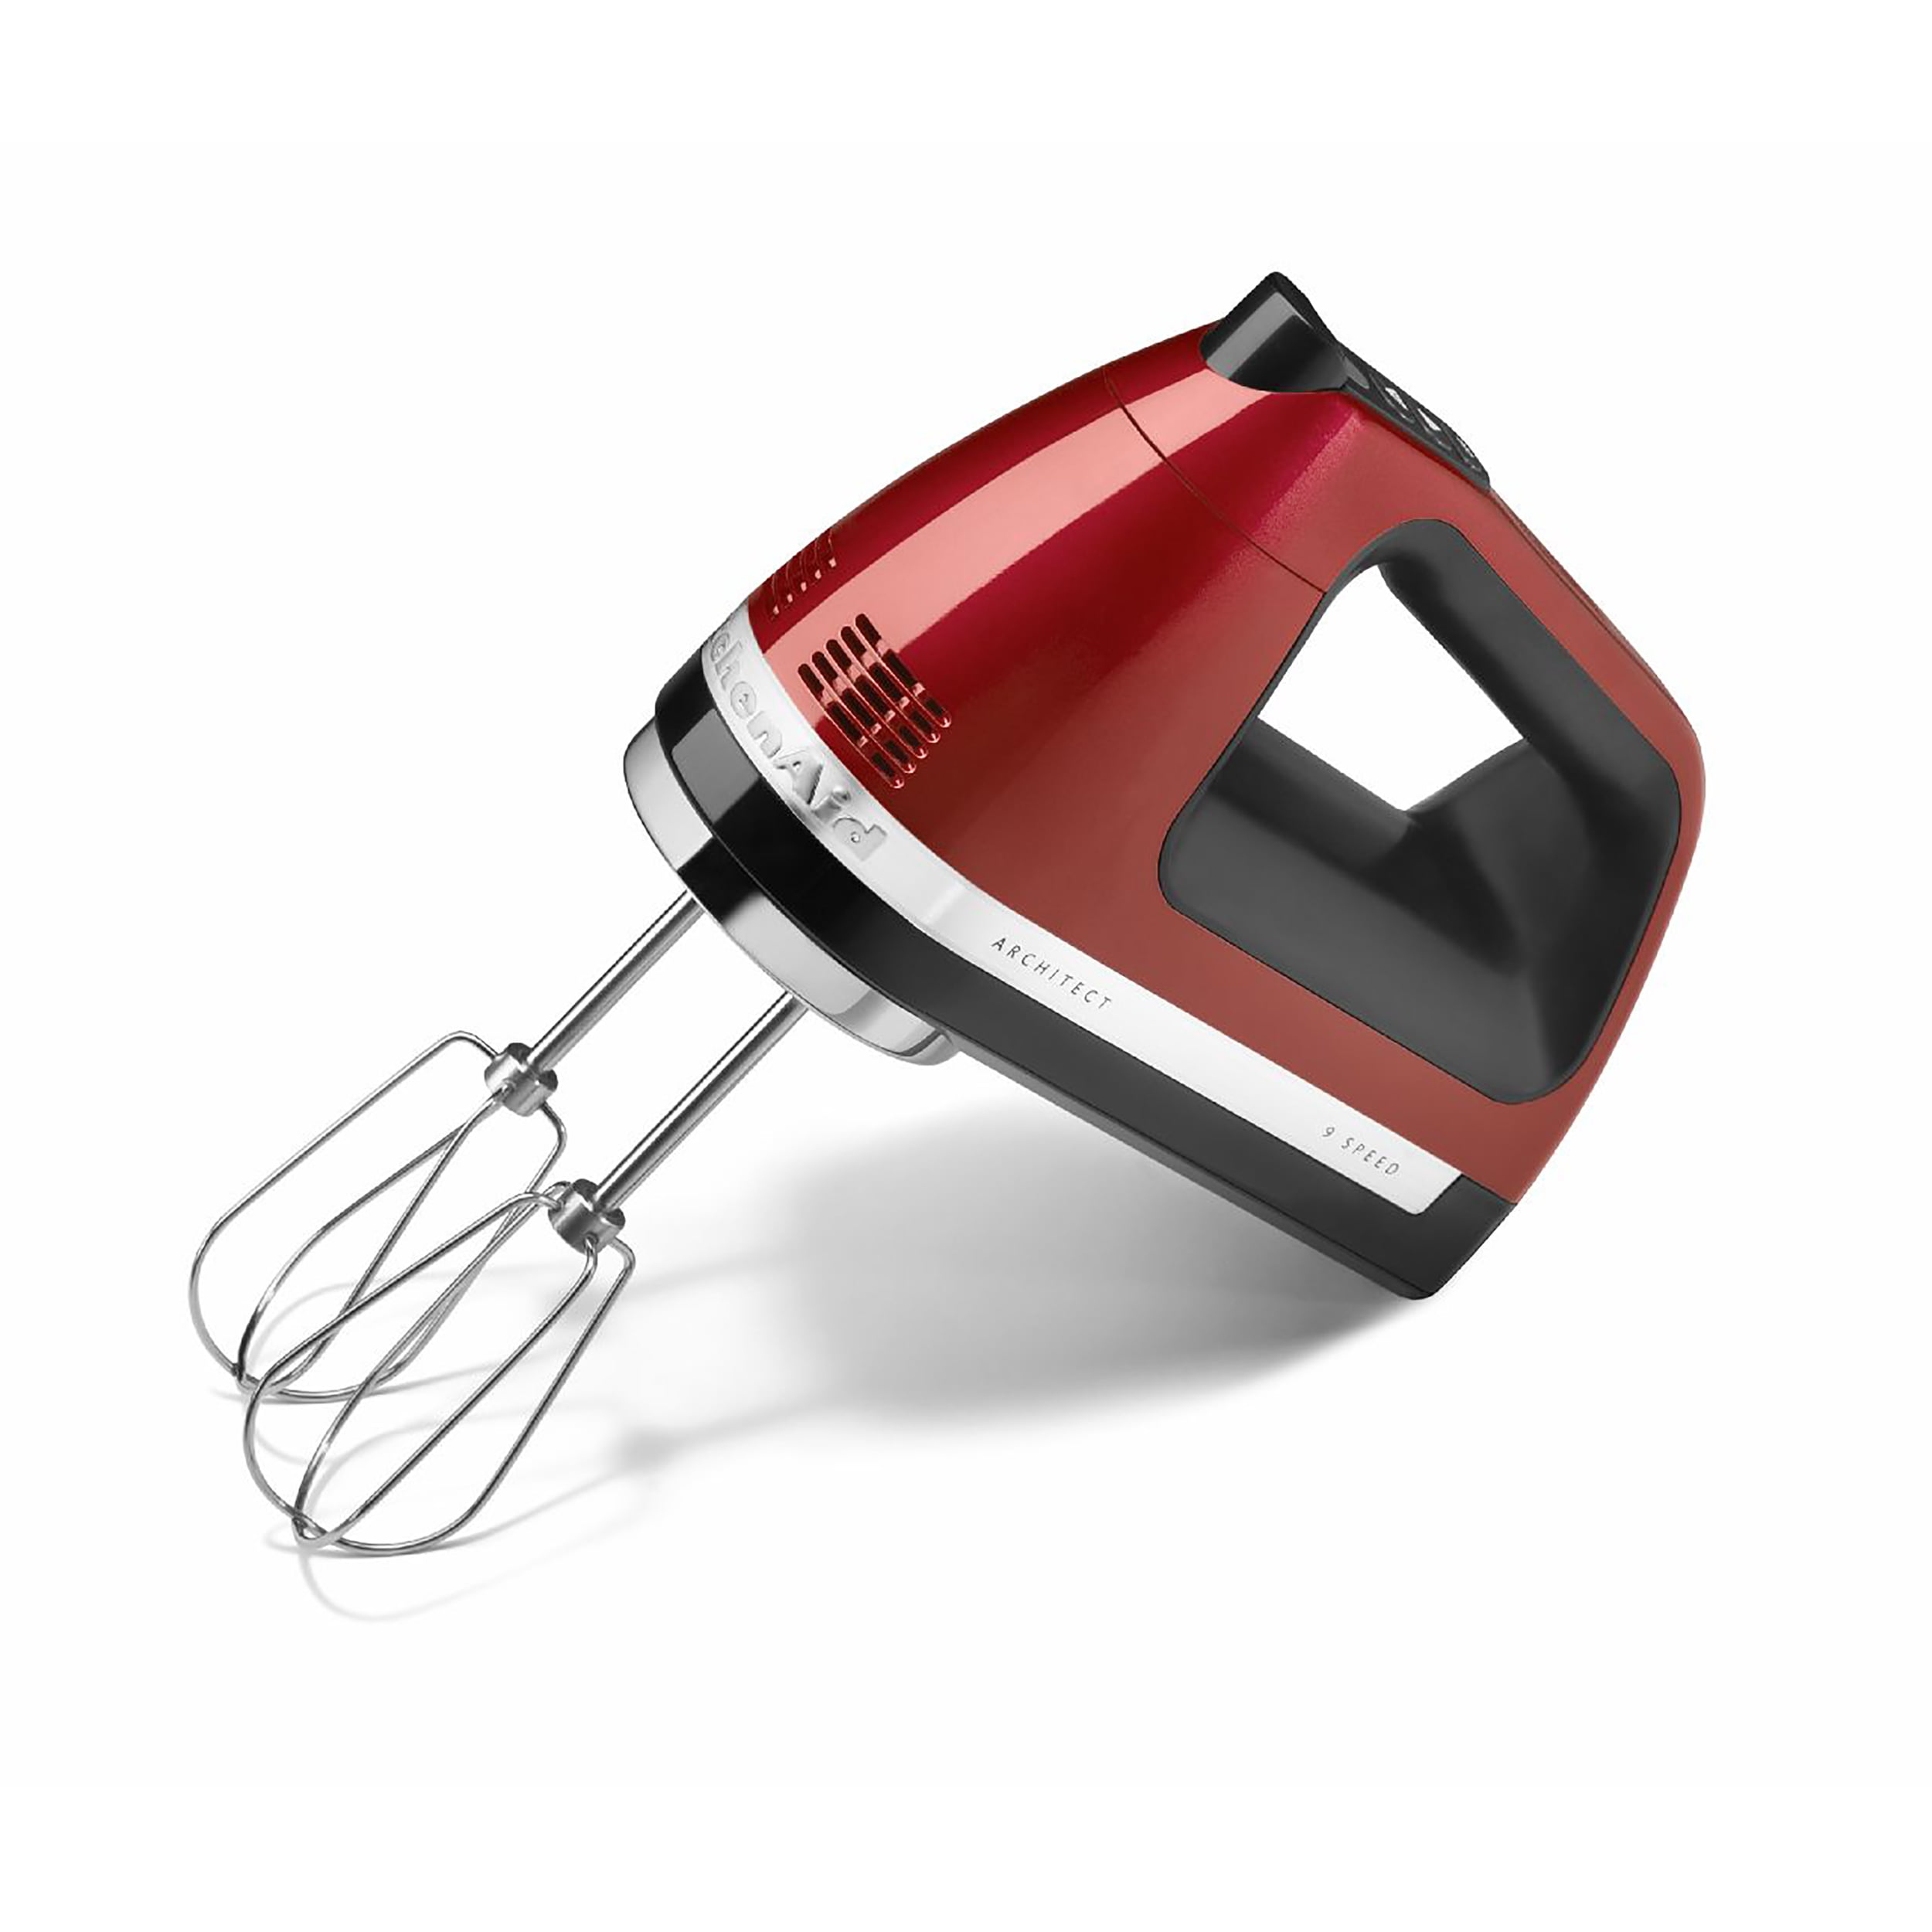  KitchenAid 9-Speed Digital Hand Mixer with Turbo Beater II  Accessories and Pro Whisk - Candy Apple Red: Home & Kitchen